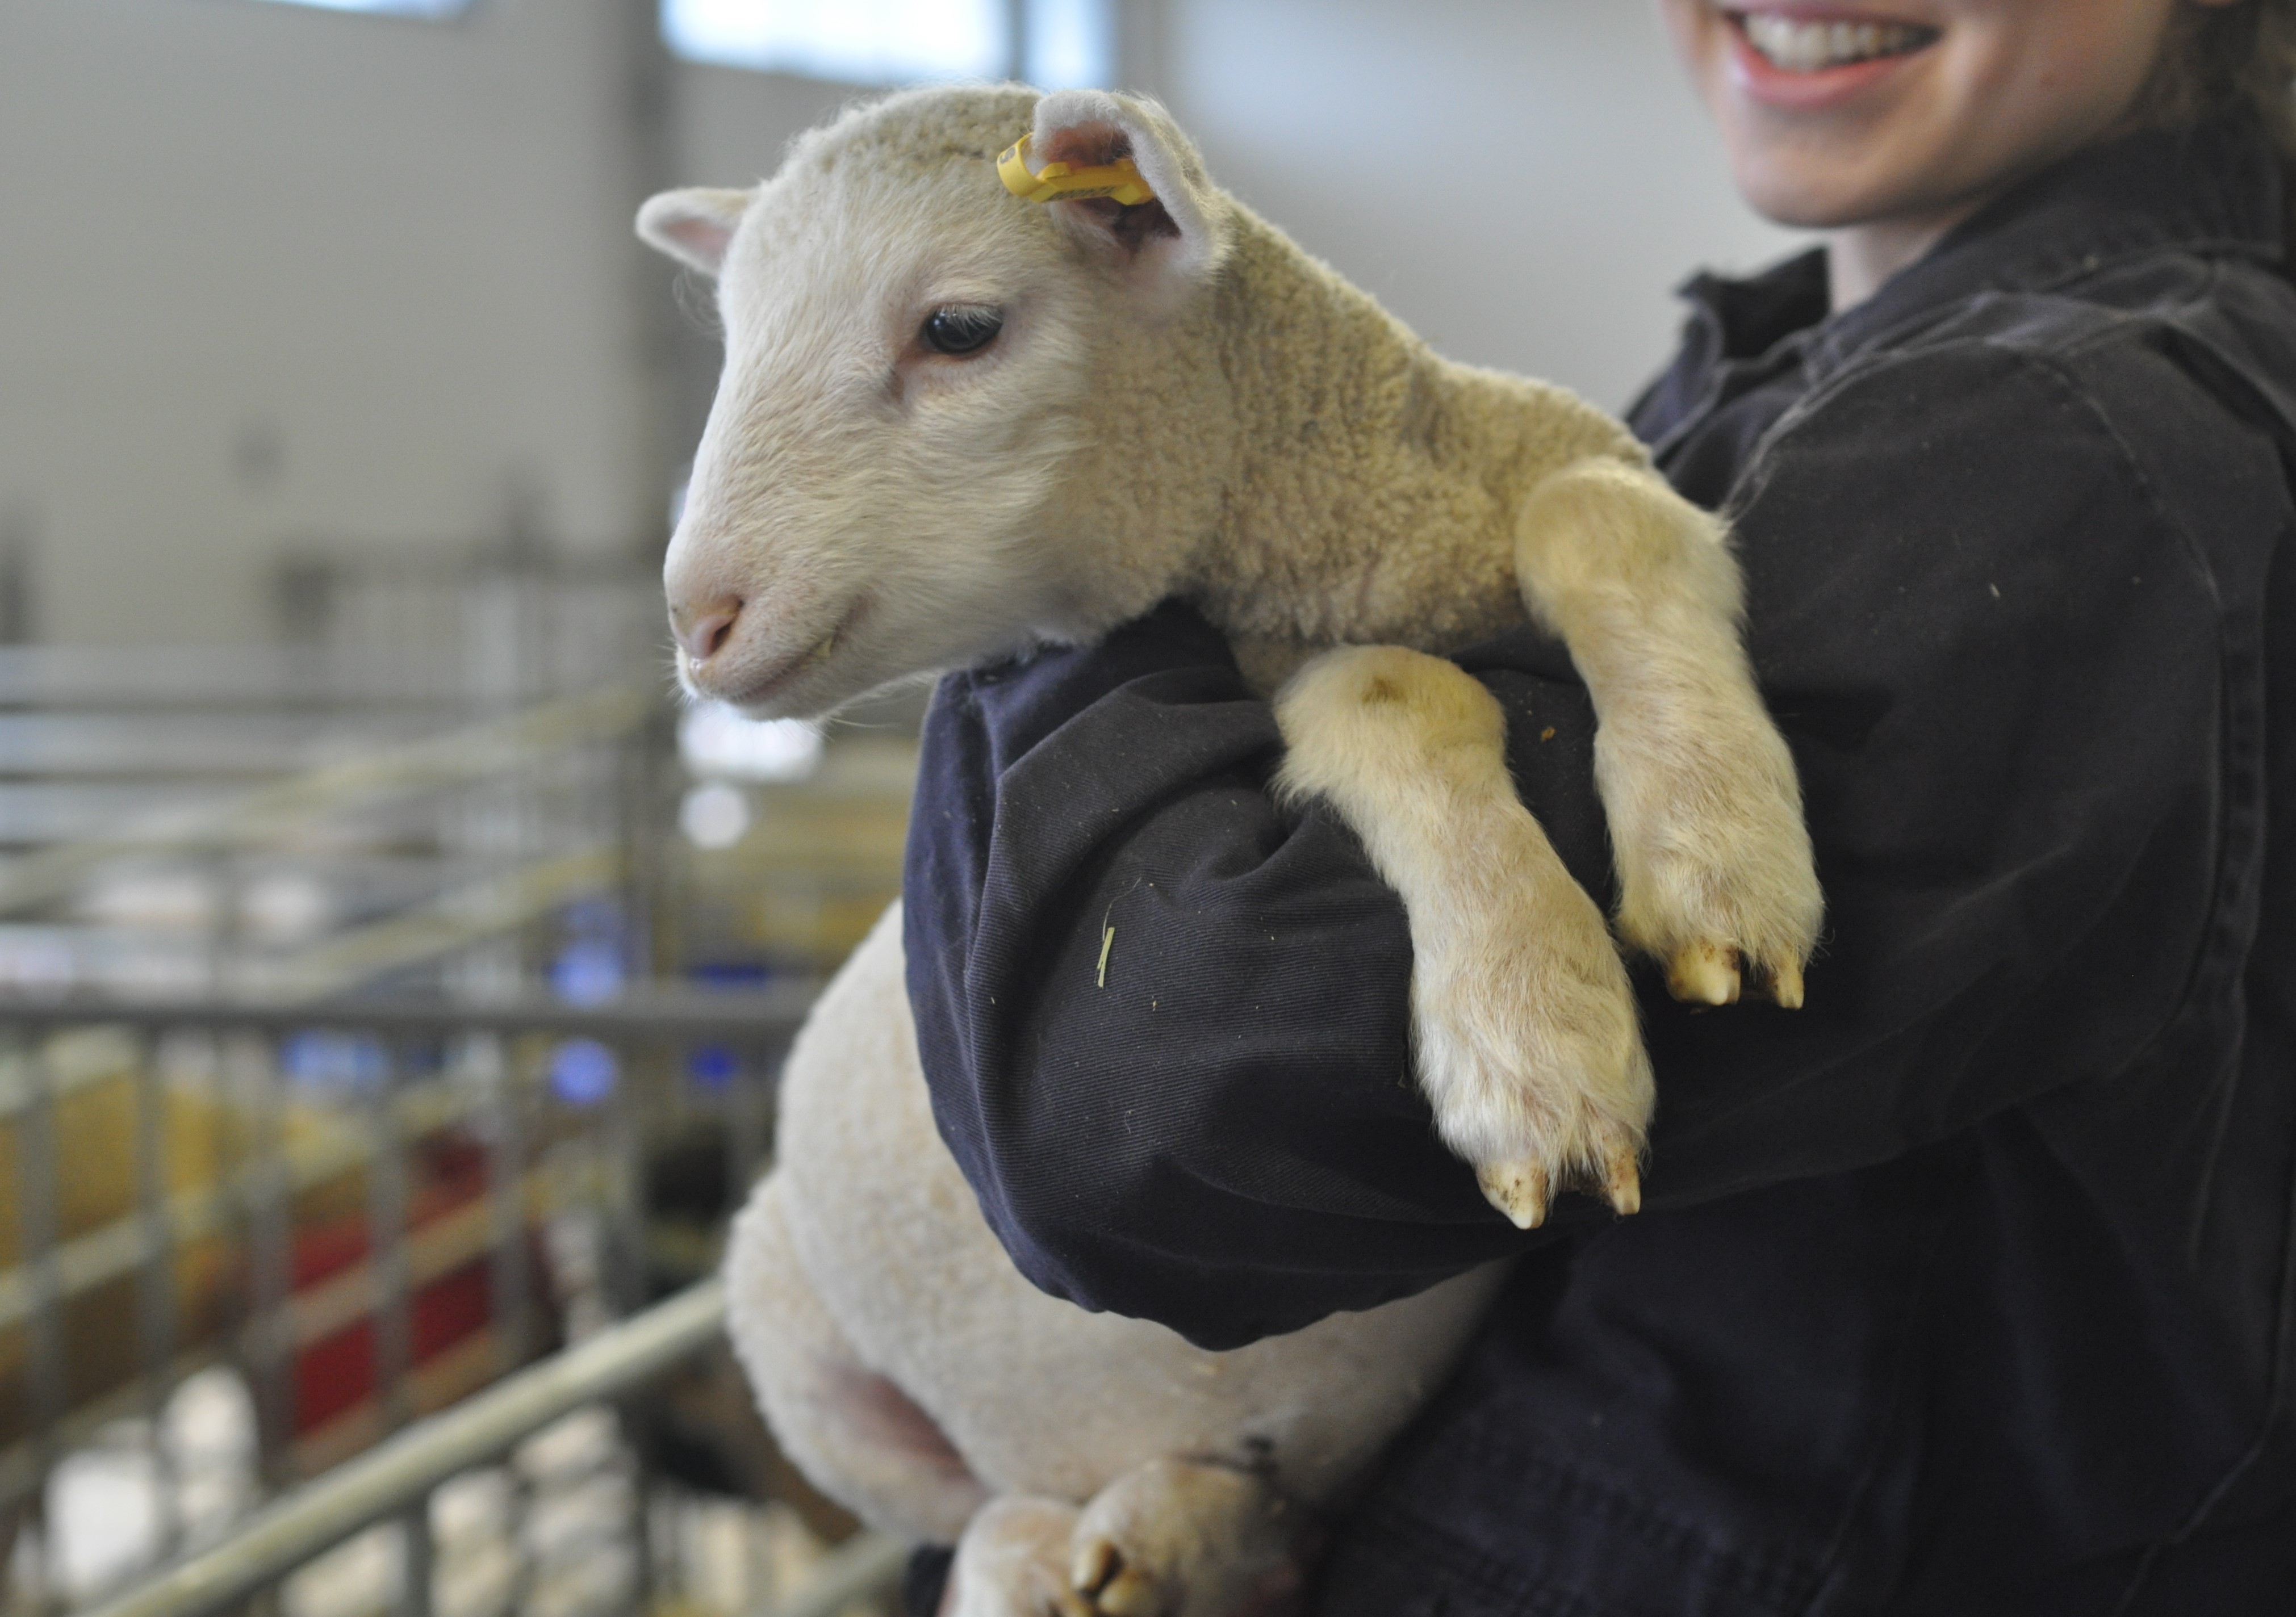 A lamb being held in a woman's arms in an animal facility. 